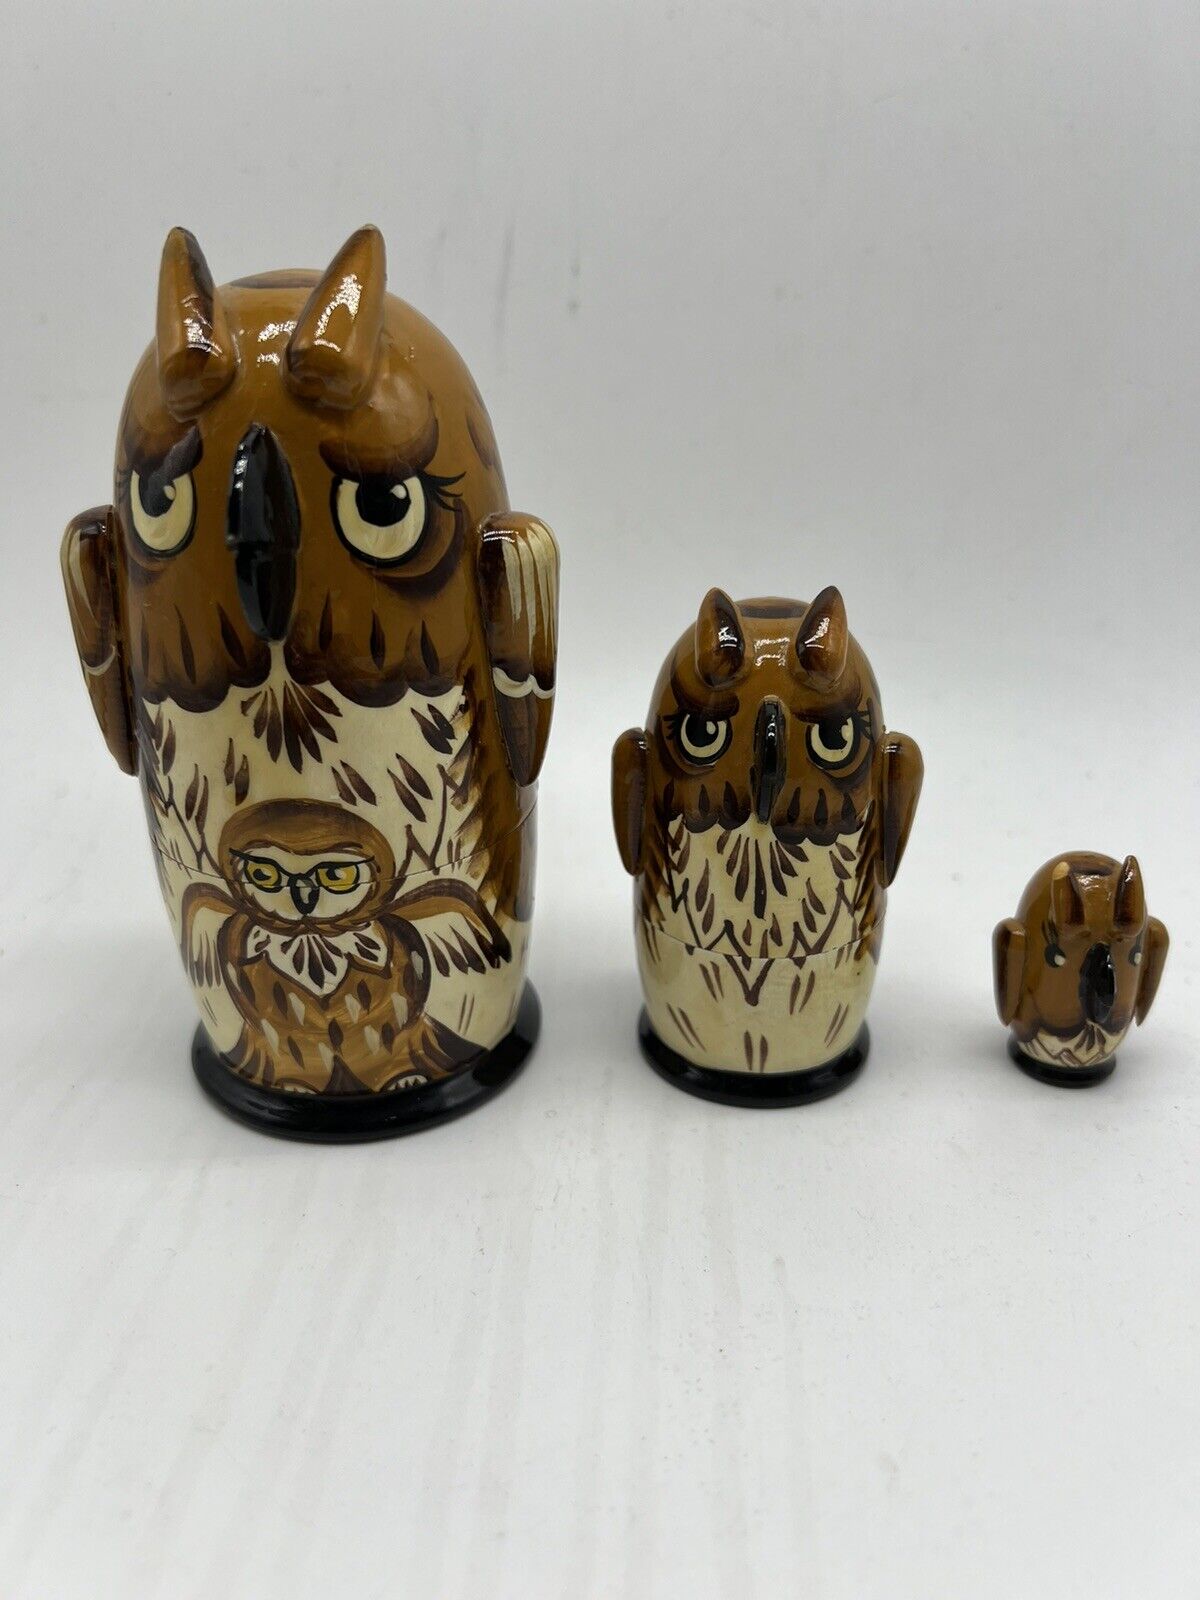 Vintage Russian Matryoshka 3 Nesting Doll Owl Family Lacquer Painted